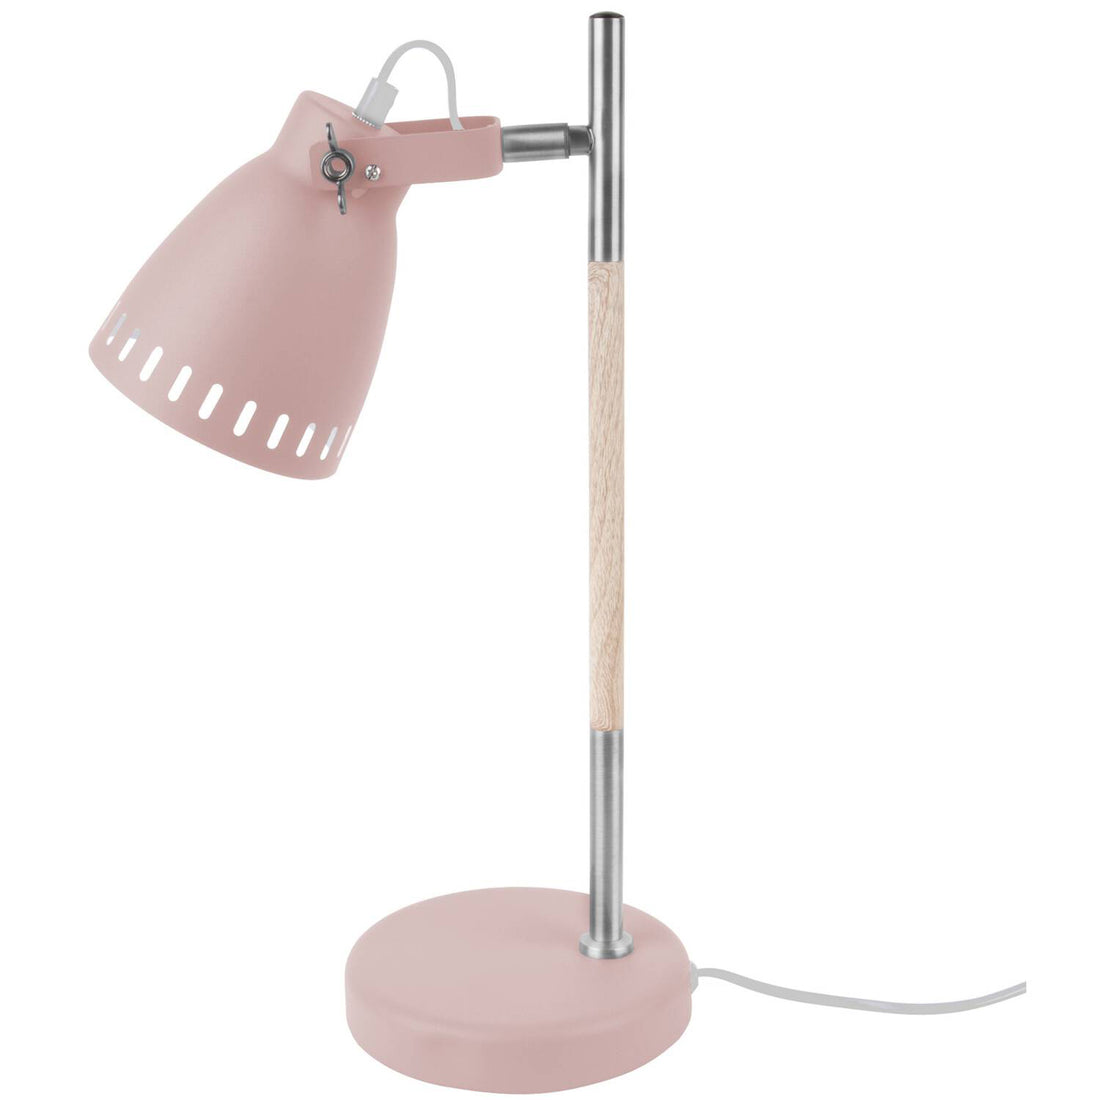 present-time-table-lamp-mingle-iron-pink-with-wood-print-nikcle-h45c-x-d12cm-pres-lm1628- (1)